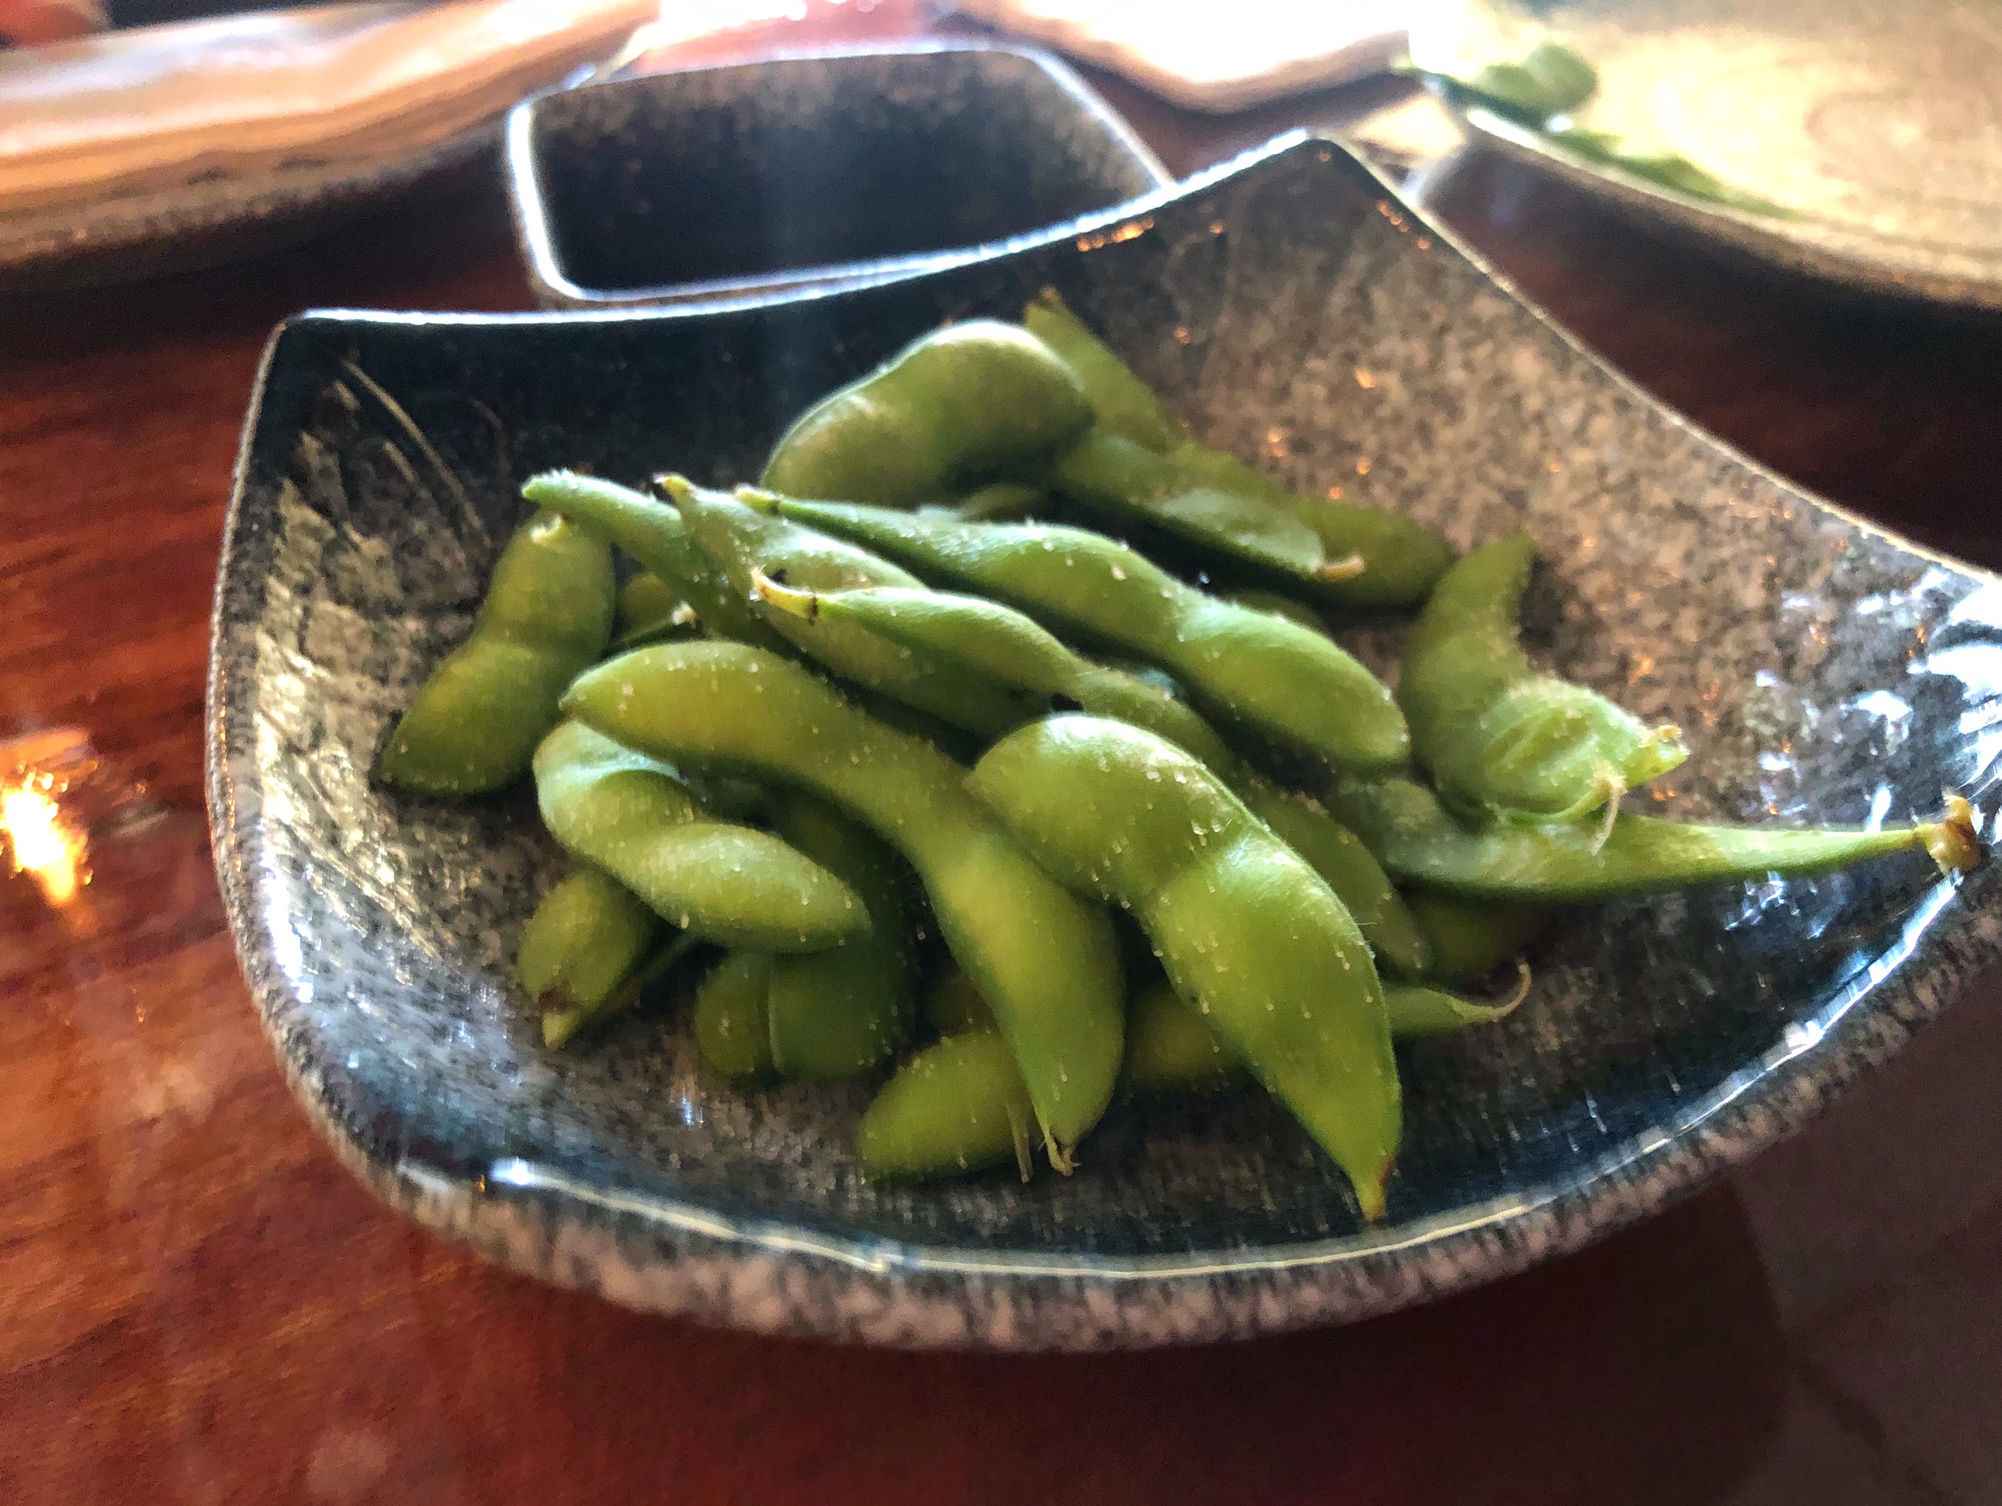 In a textured blue bowl, there is a serving of edamame. Photo by Alyssa Buckley.